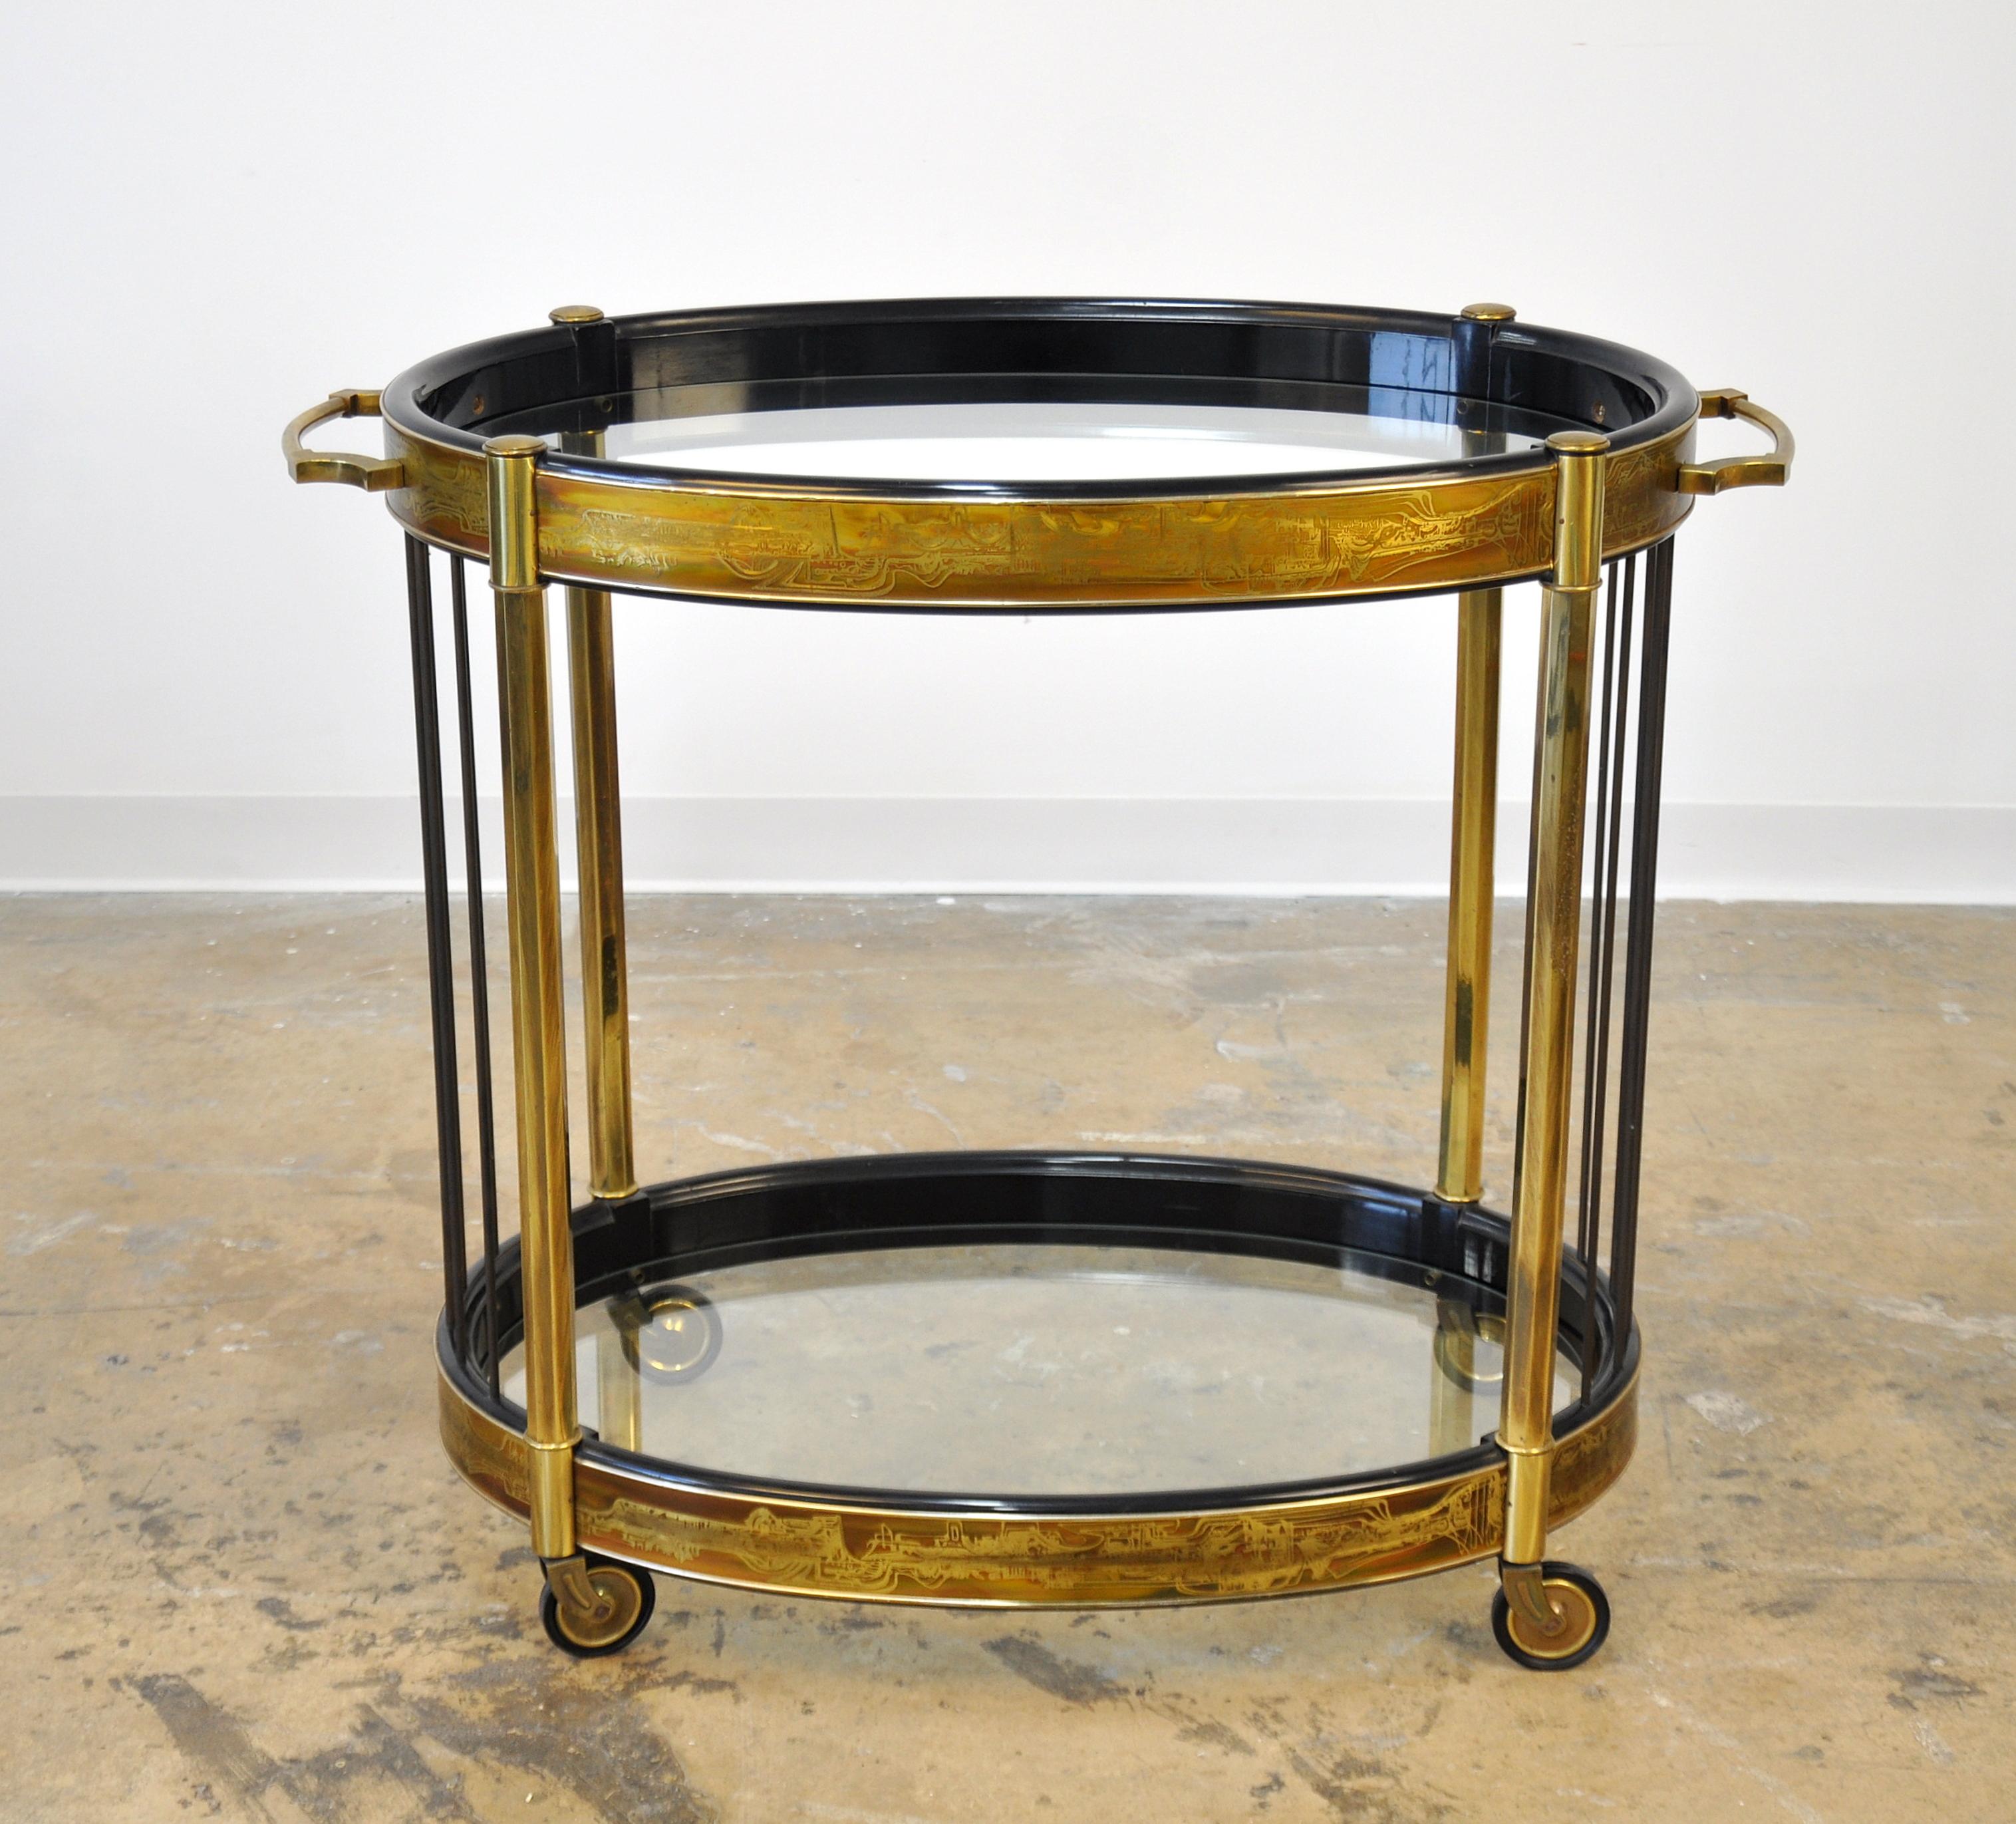 A Hollywood Regency black lacquered wood, acid etched brass and glass rolling, two-tier oval serving trolley, designed by Bernhard Rohne for Mastercraft in the 1970s. The bar or tea cart features: solid brass legs and handles; patinated brass rods;